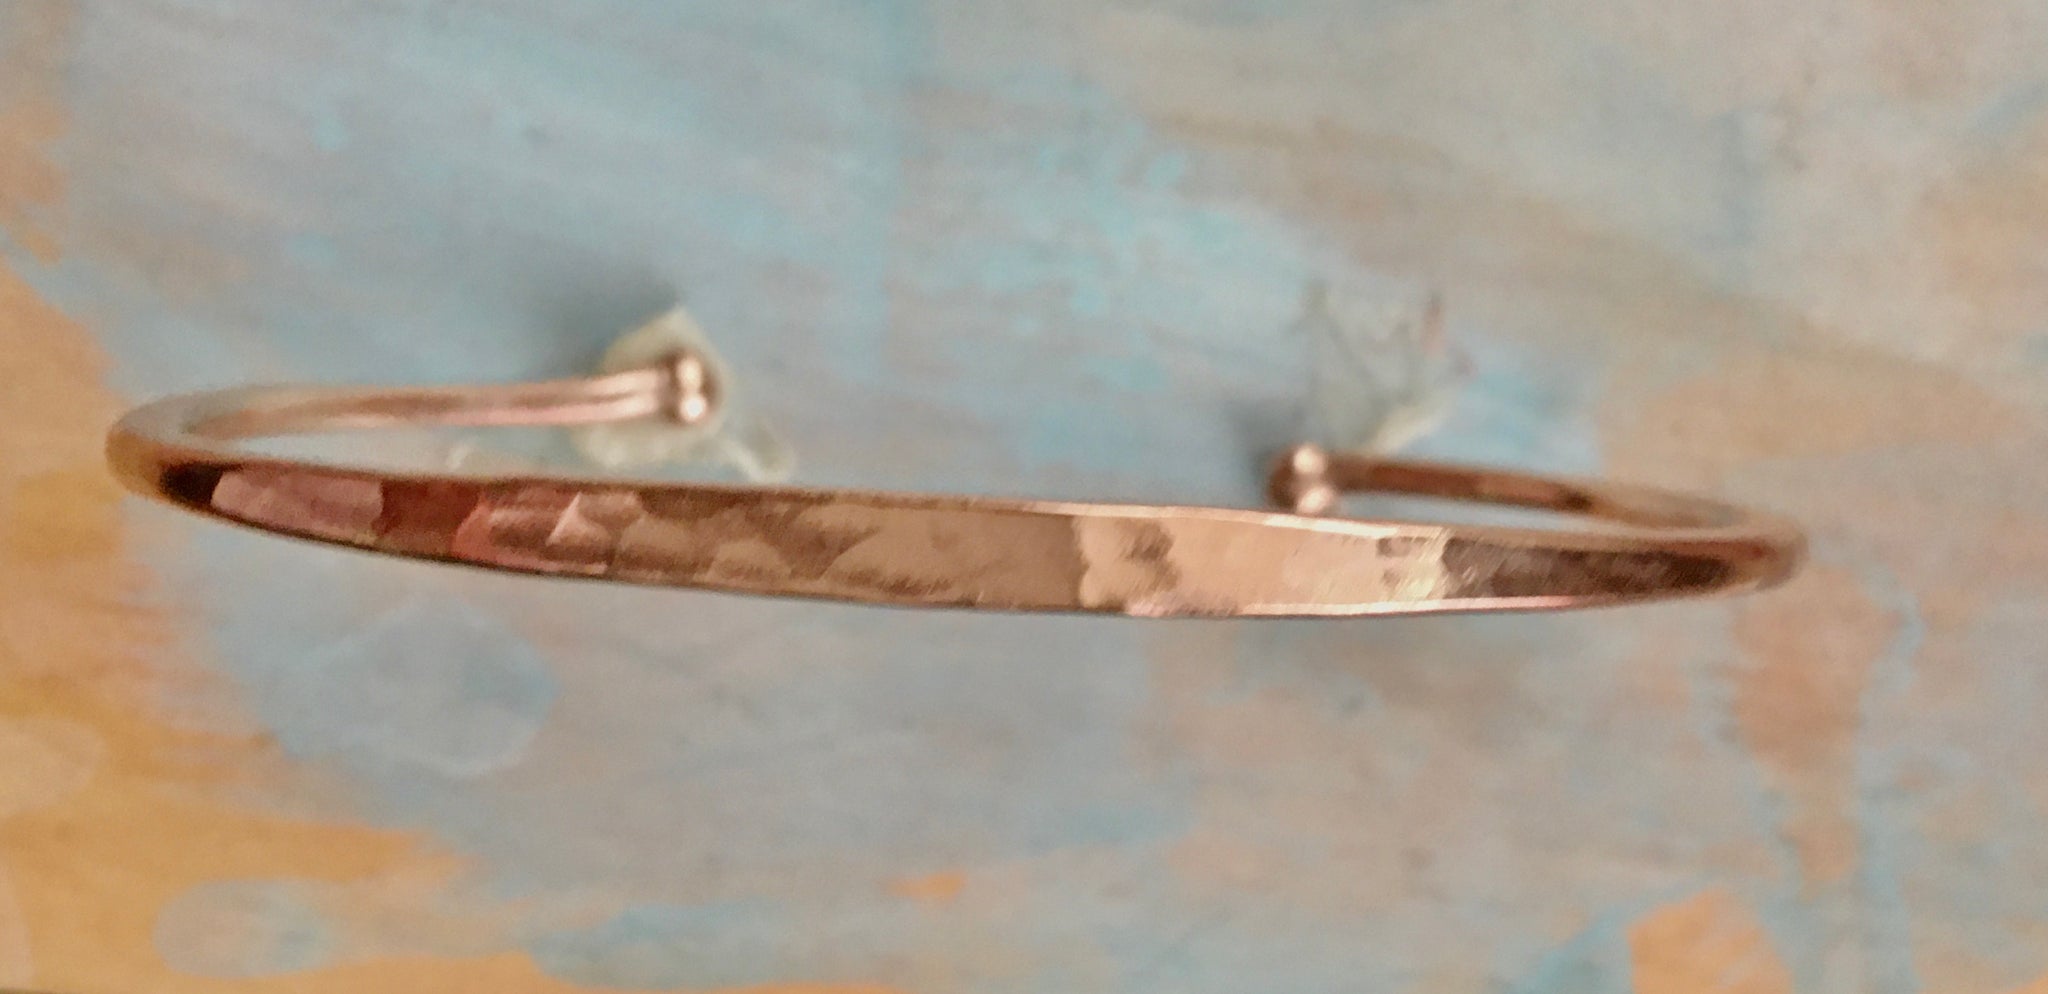 Simple hammered cuff